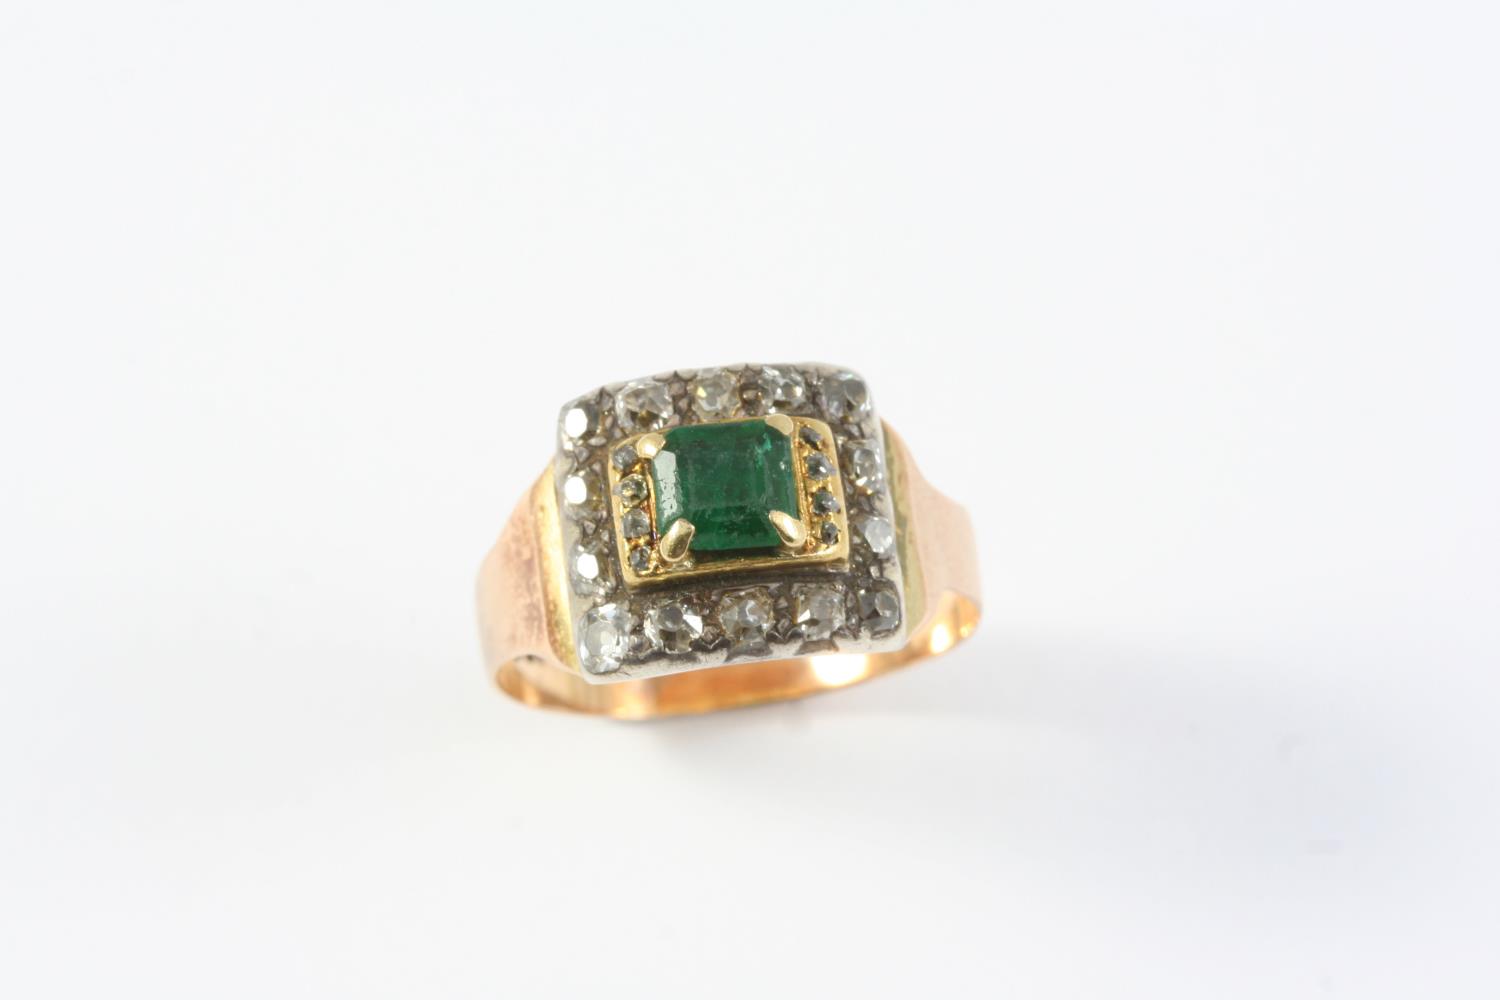 A GEORGE III EMERALD AND DIAMOND RING the square-shaped emerald is set within a surround of rose-cut